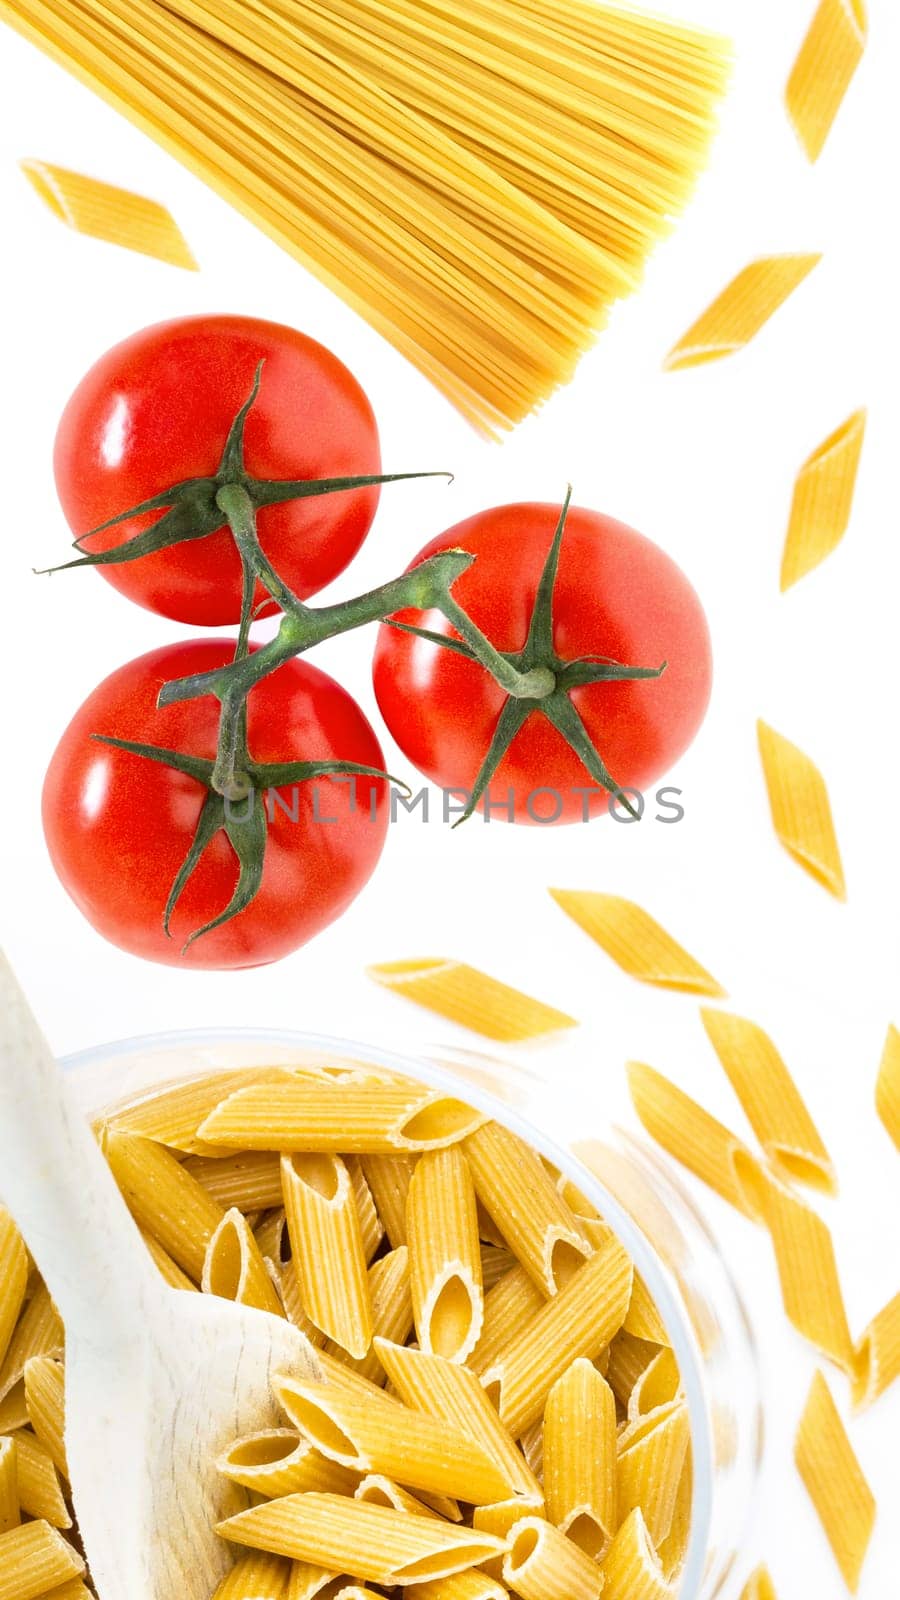 Uncooked raw italian pasta with tomatoes. Concepts and backgrounds.